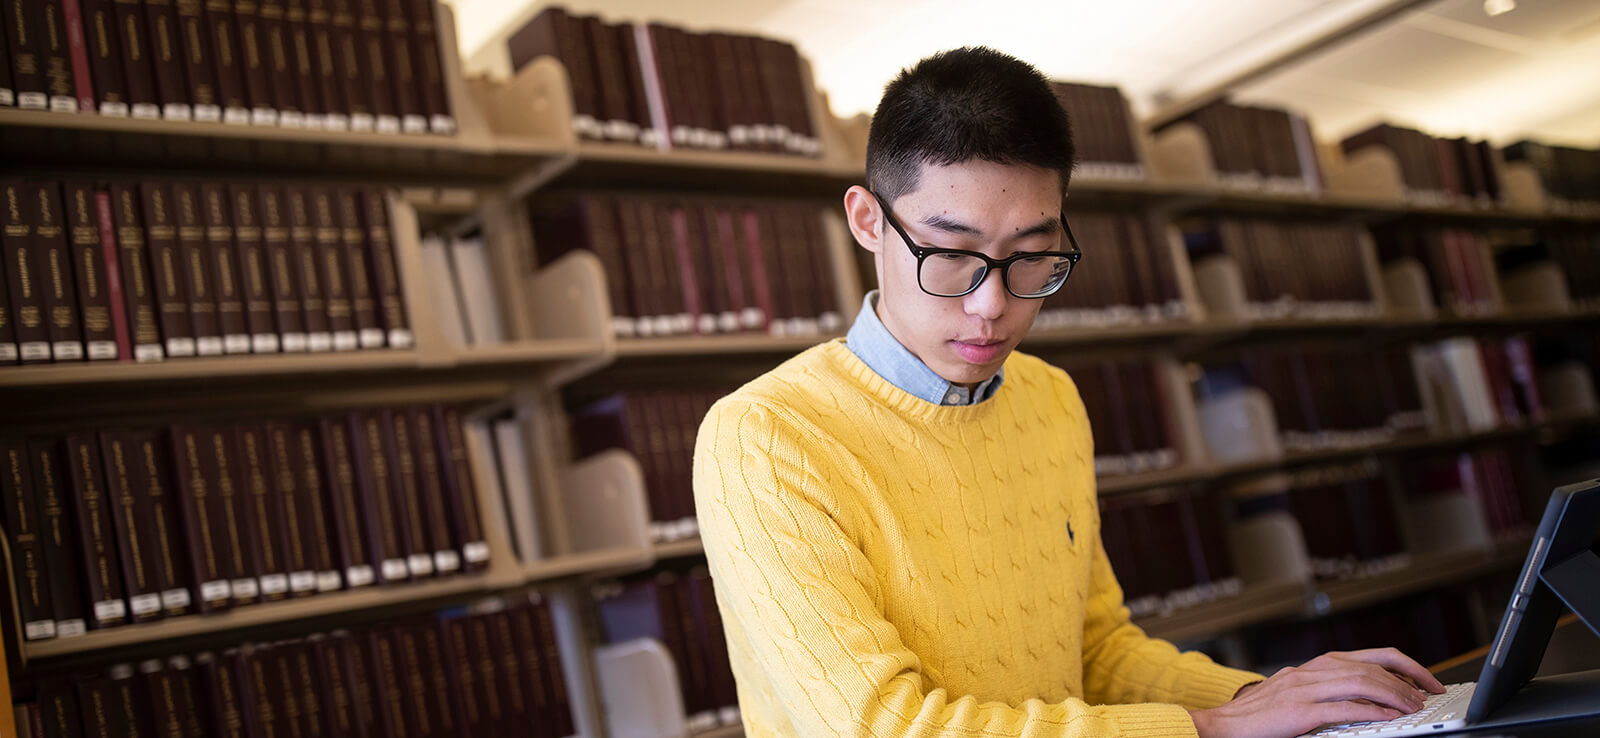 Student working on laptop in front of library bookshelves